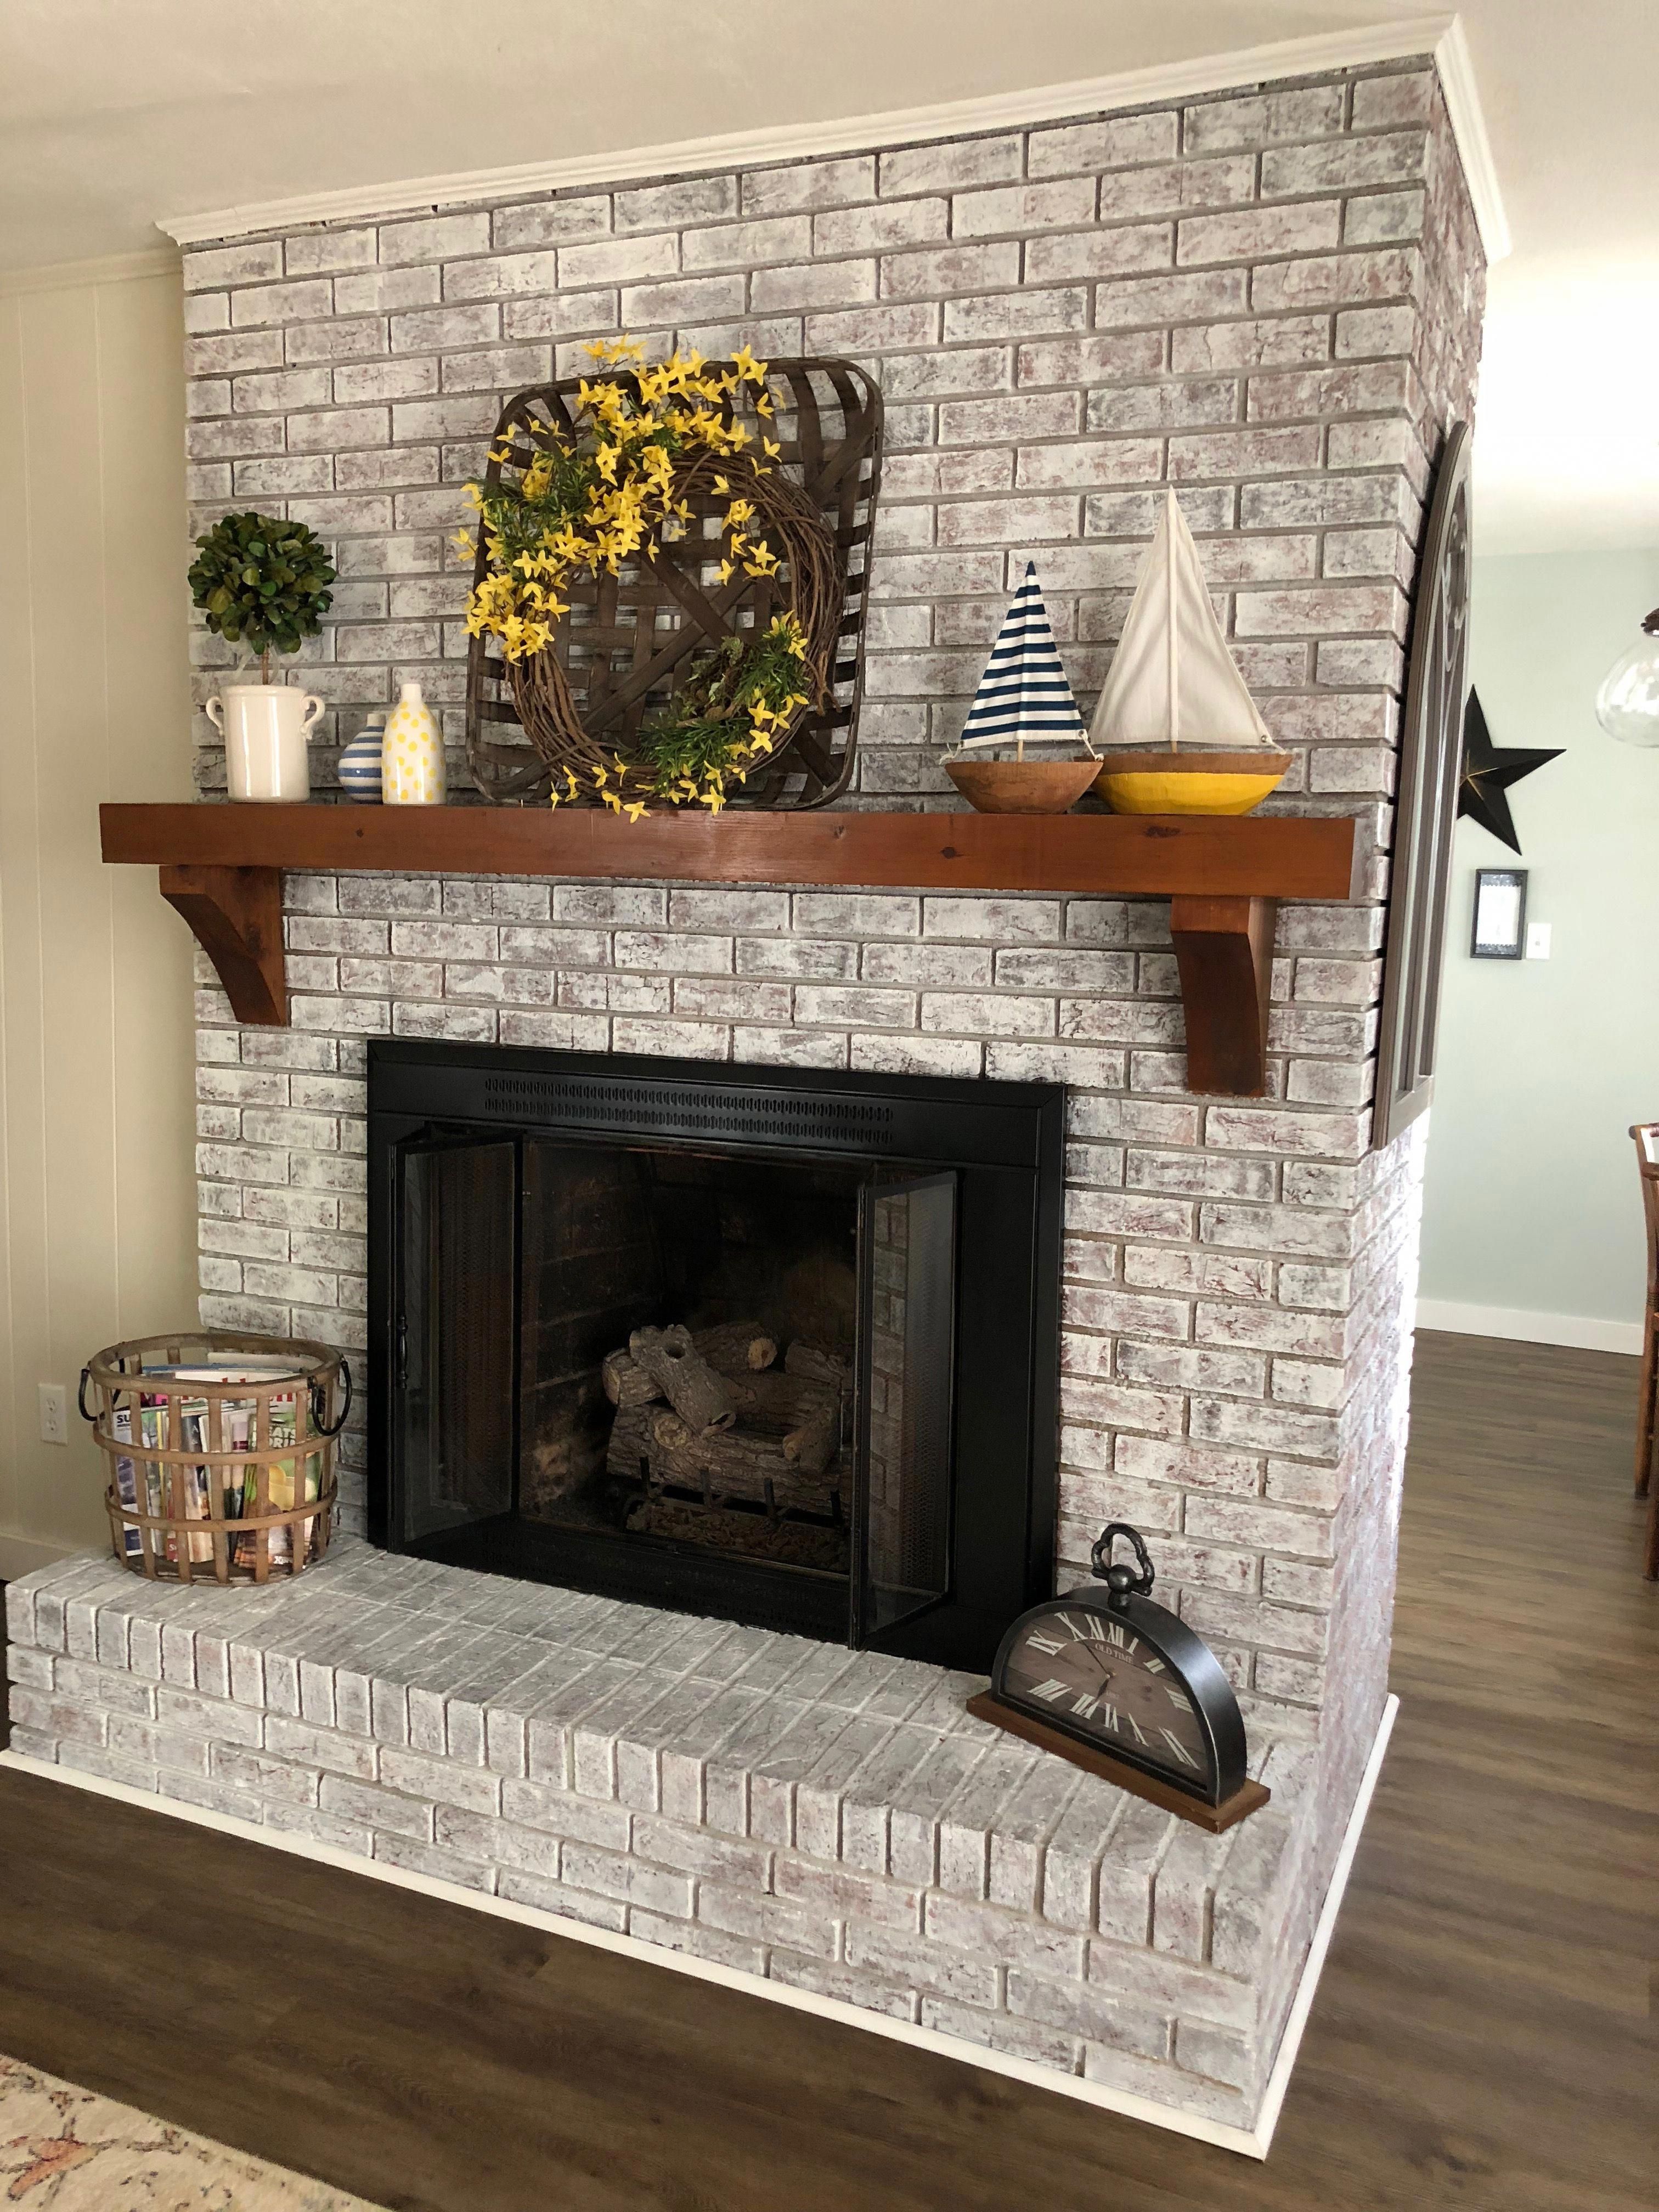 Red Brick Fireplace Makeover New Painted Brick Fireplace Sw Pure White Over Dark Red Brick